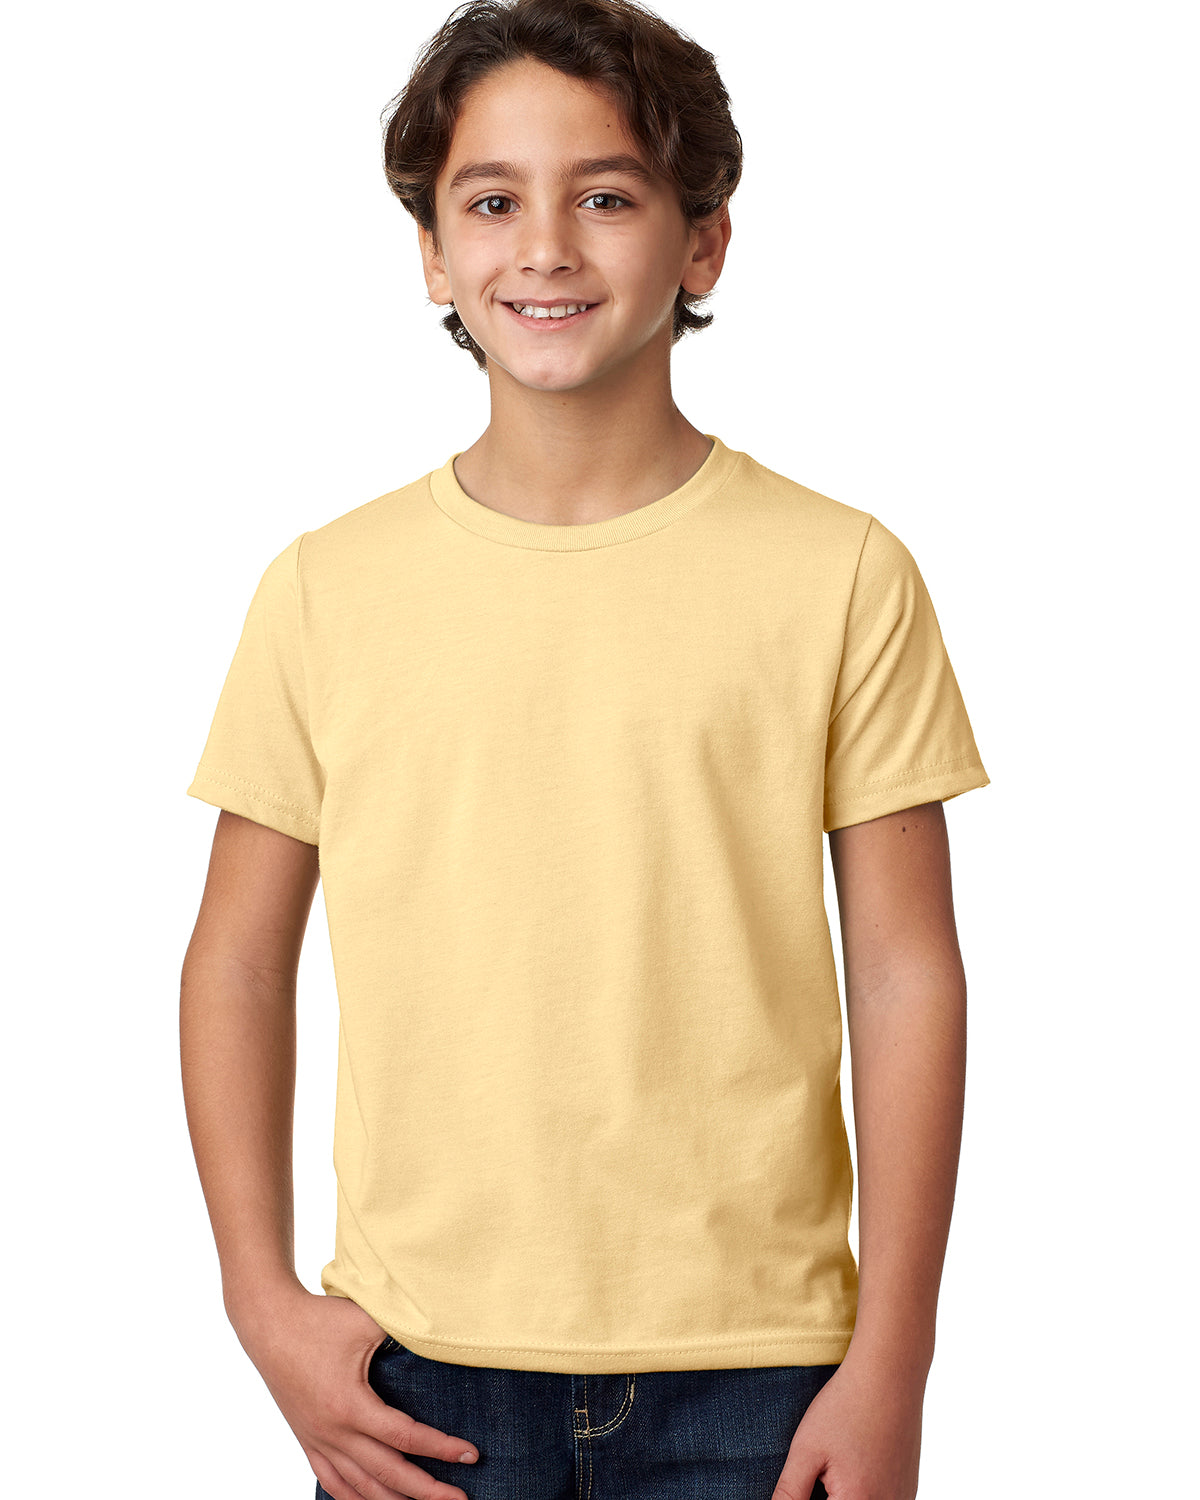 Youth Soft Cotton/Poly Blend T-Shirt Next Level 3312